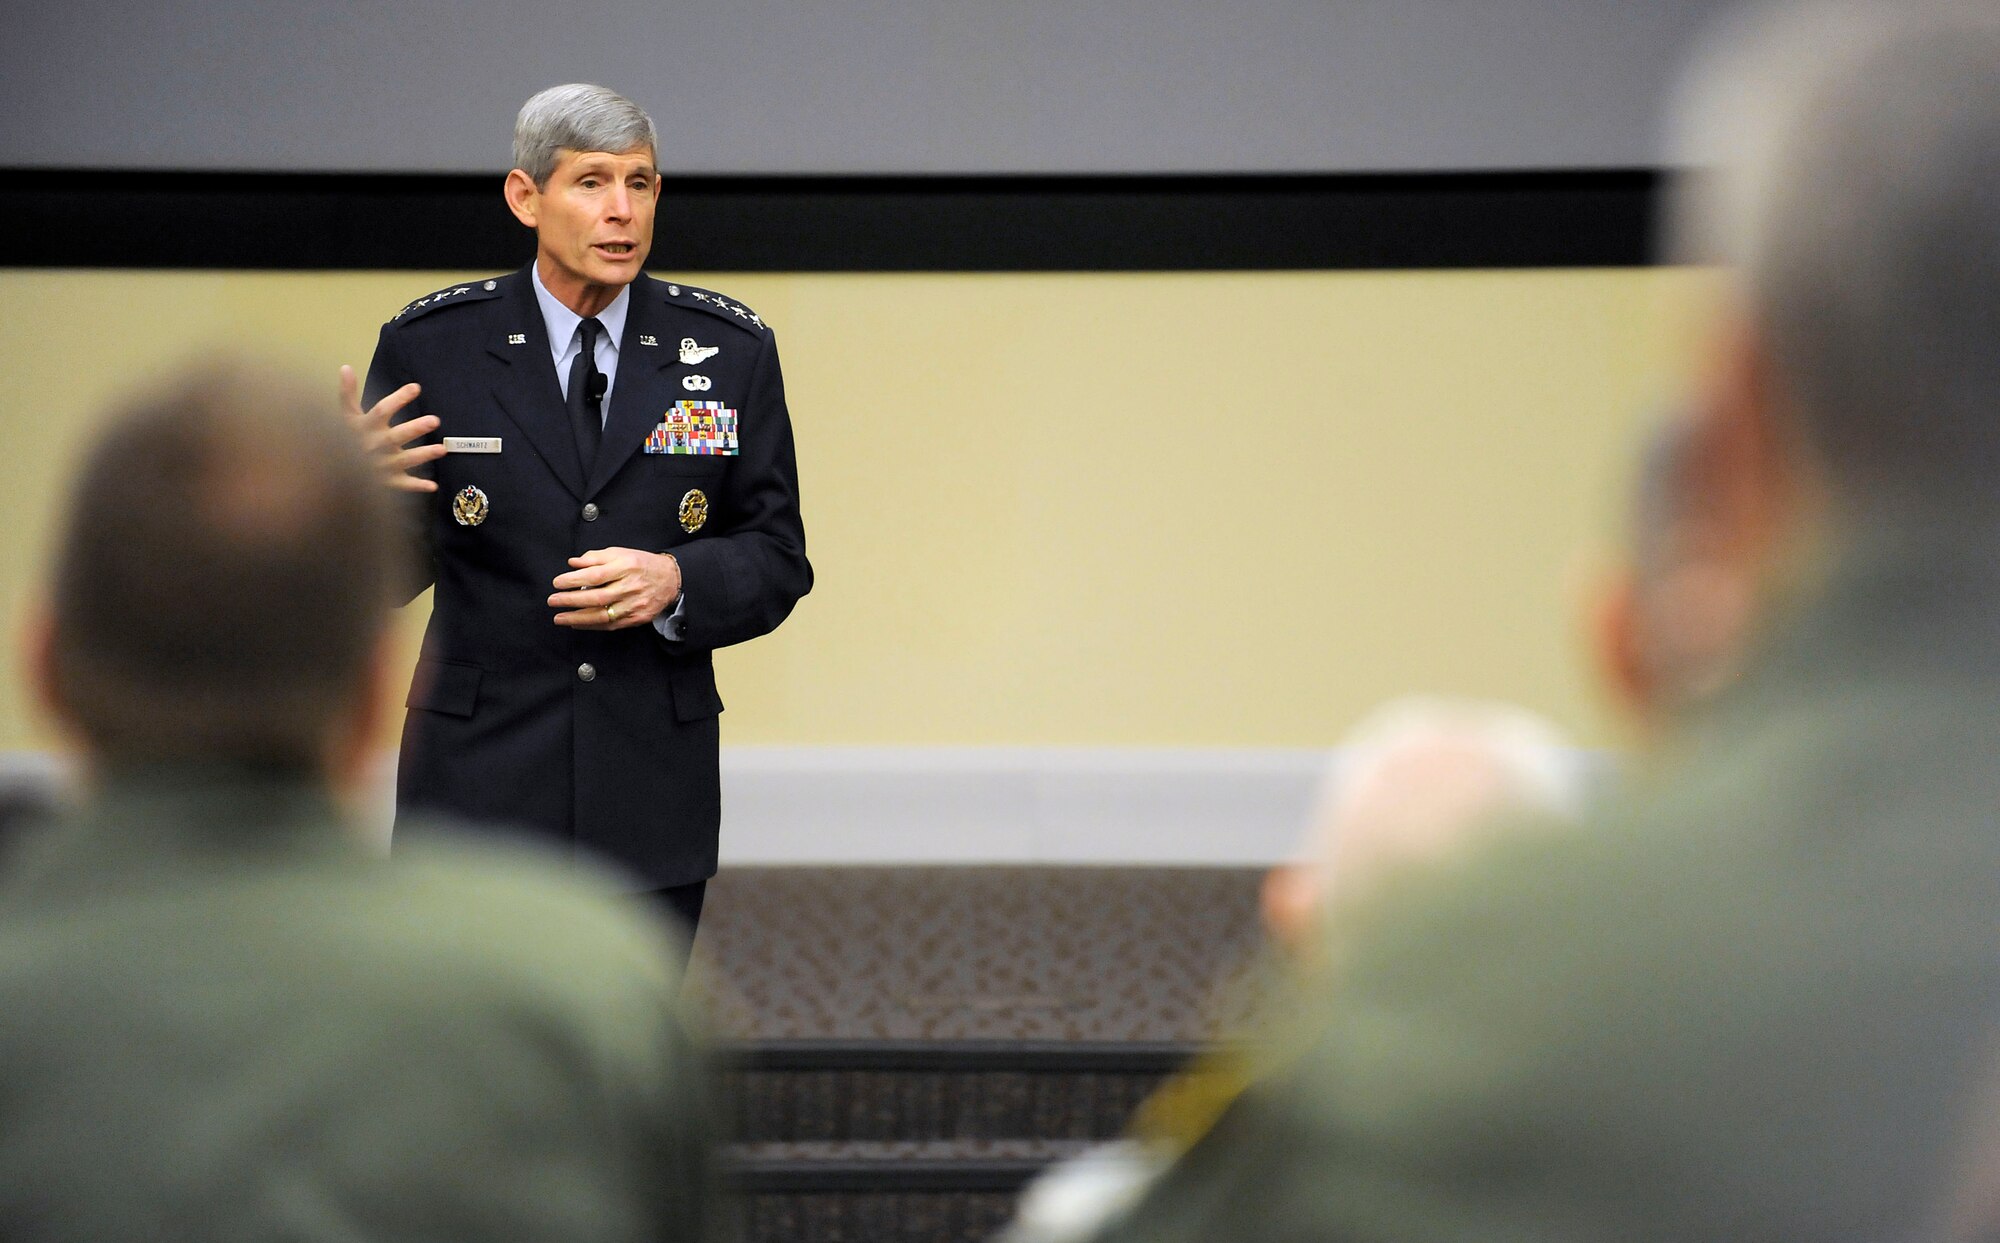 Air Force Chief of Staff Gen. Norton Schwartz speaks to attendees at the Total Force Integration Summit at Joint Base Andrews, Md., April 2, 2012.  (U.S. Air Force photo/Scott M. Ash)